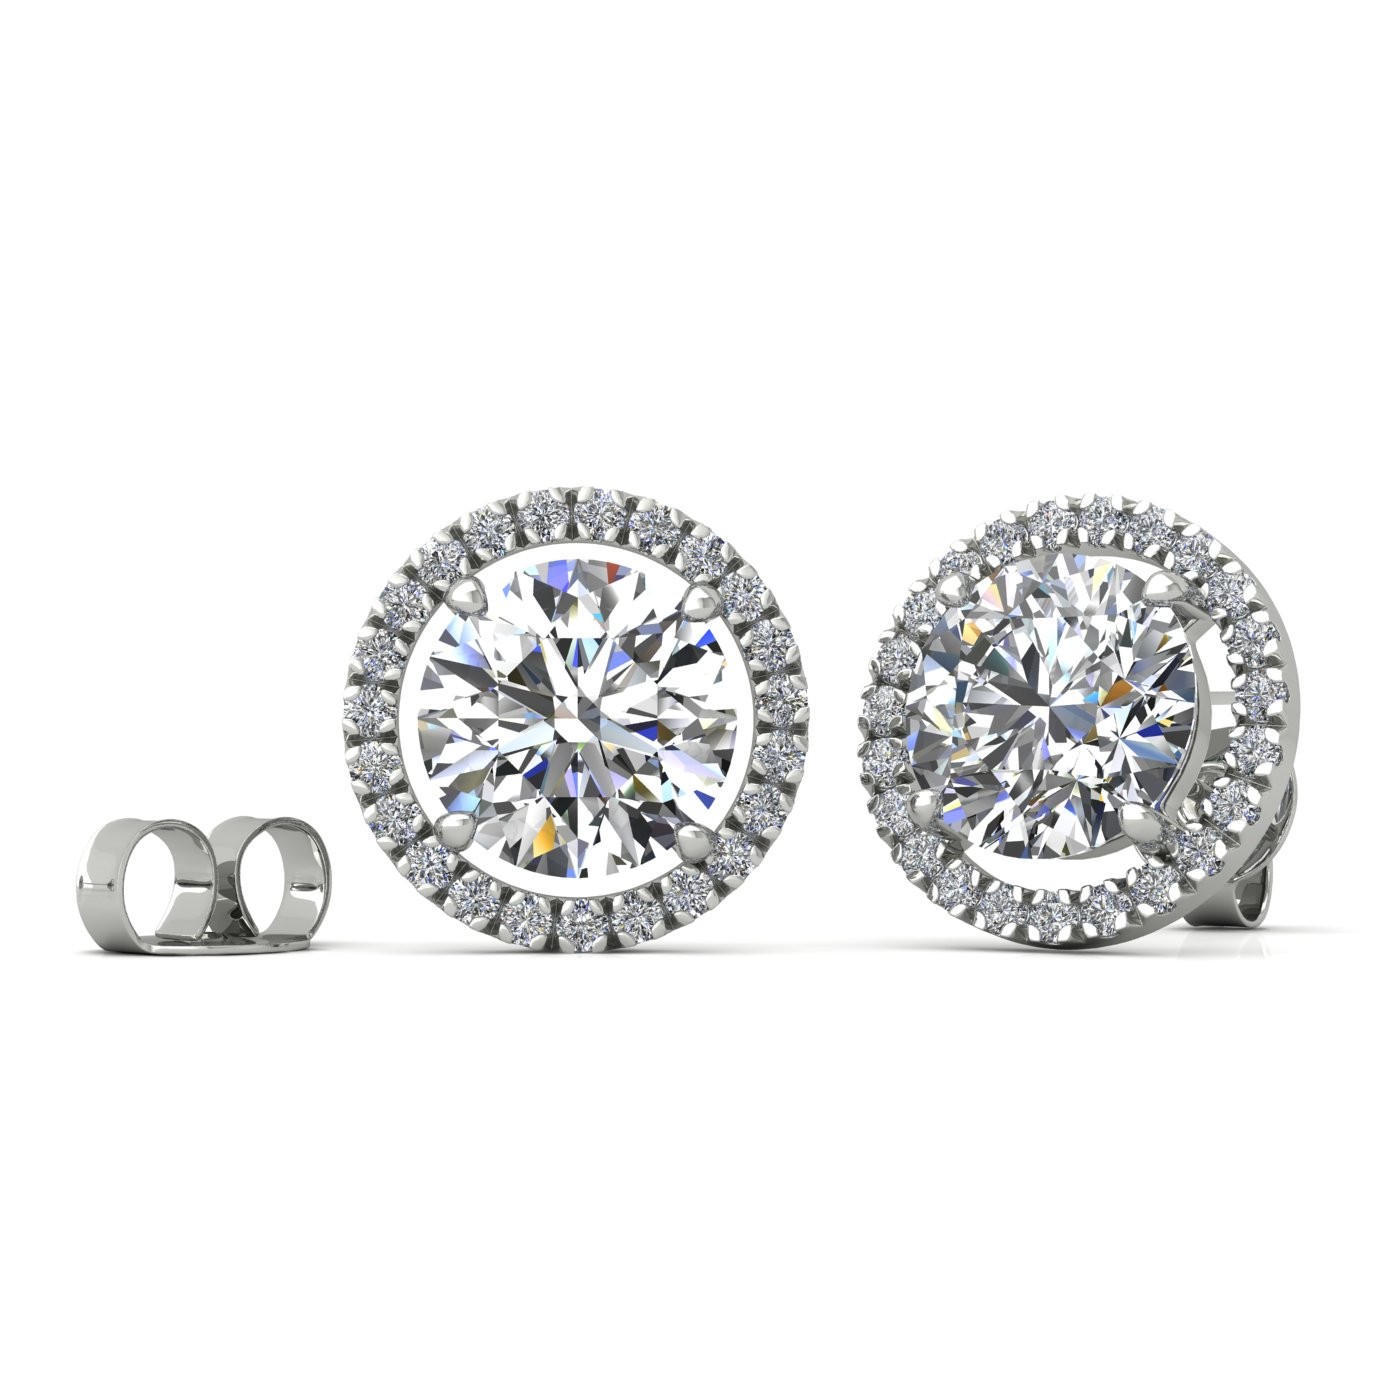 18k white gold  0,5 ct each (1tcw) 4 prongs round brilliant cut halo diamond earring studs Photos & images